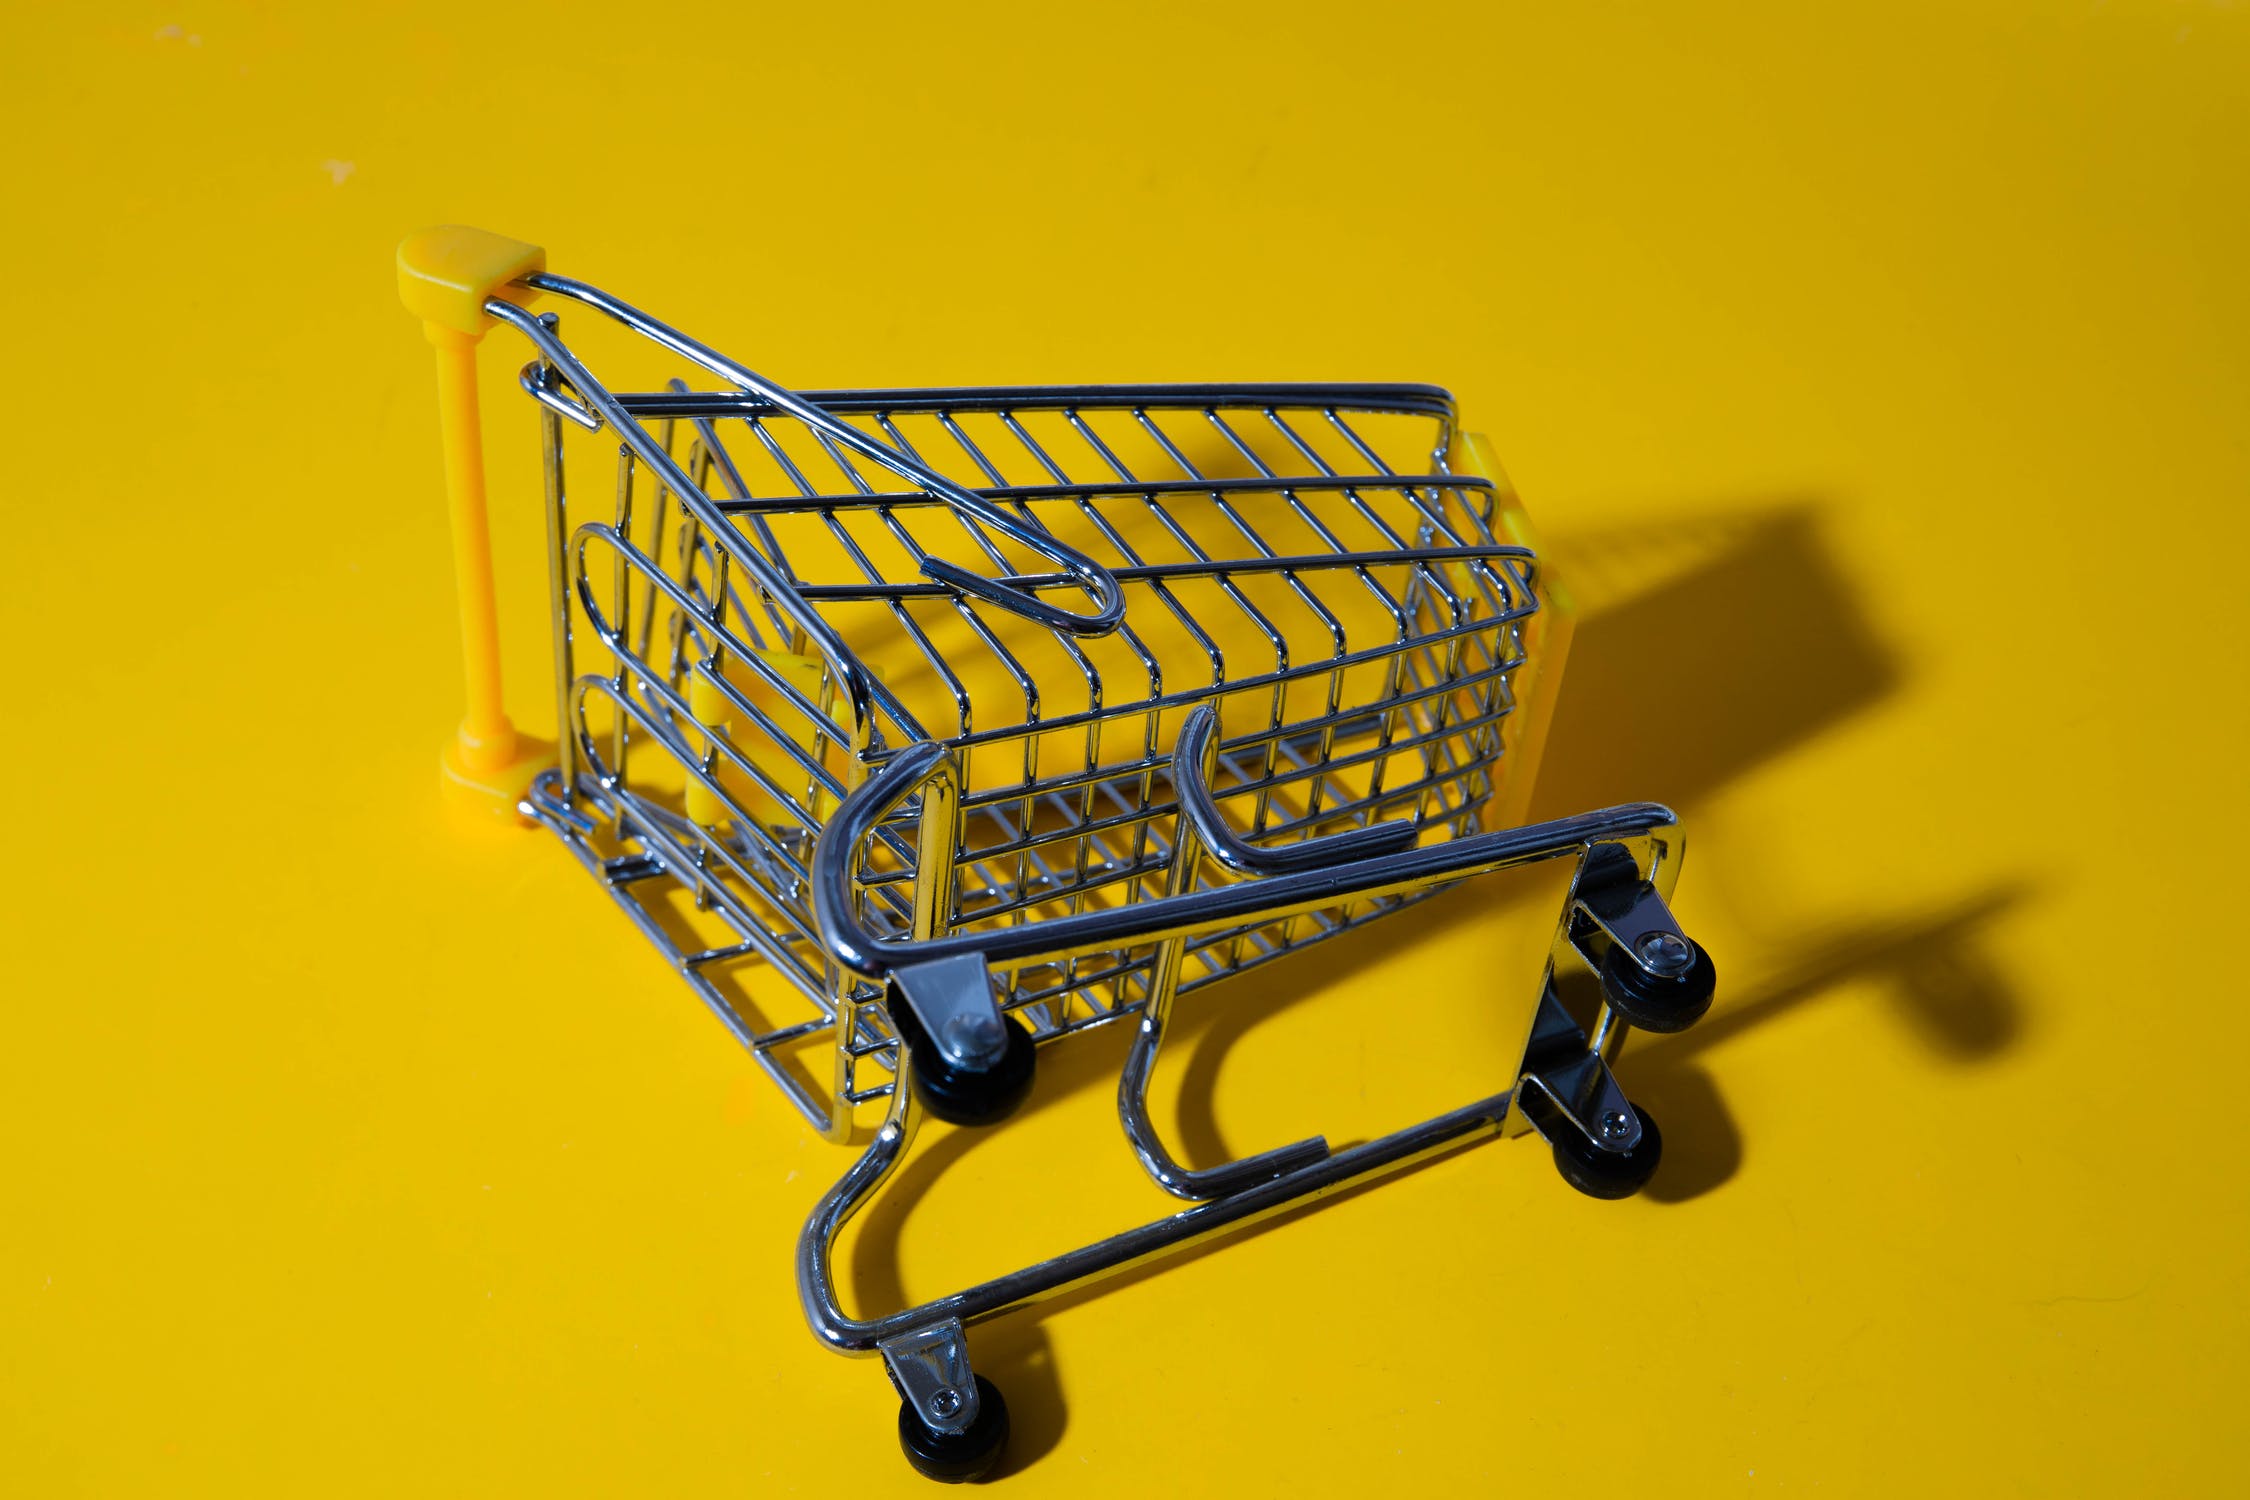 A toy shopping cart on its side on a yellow surface